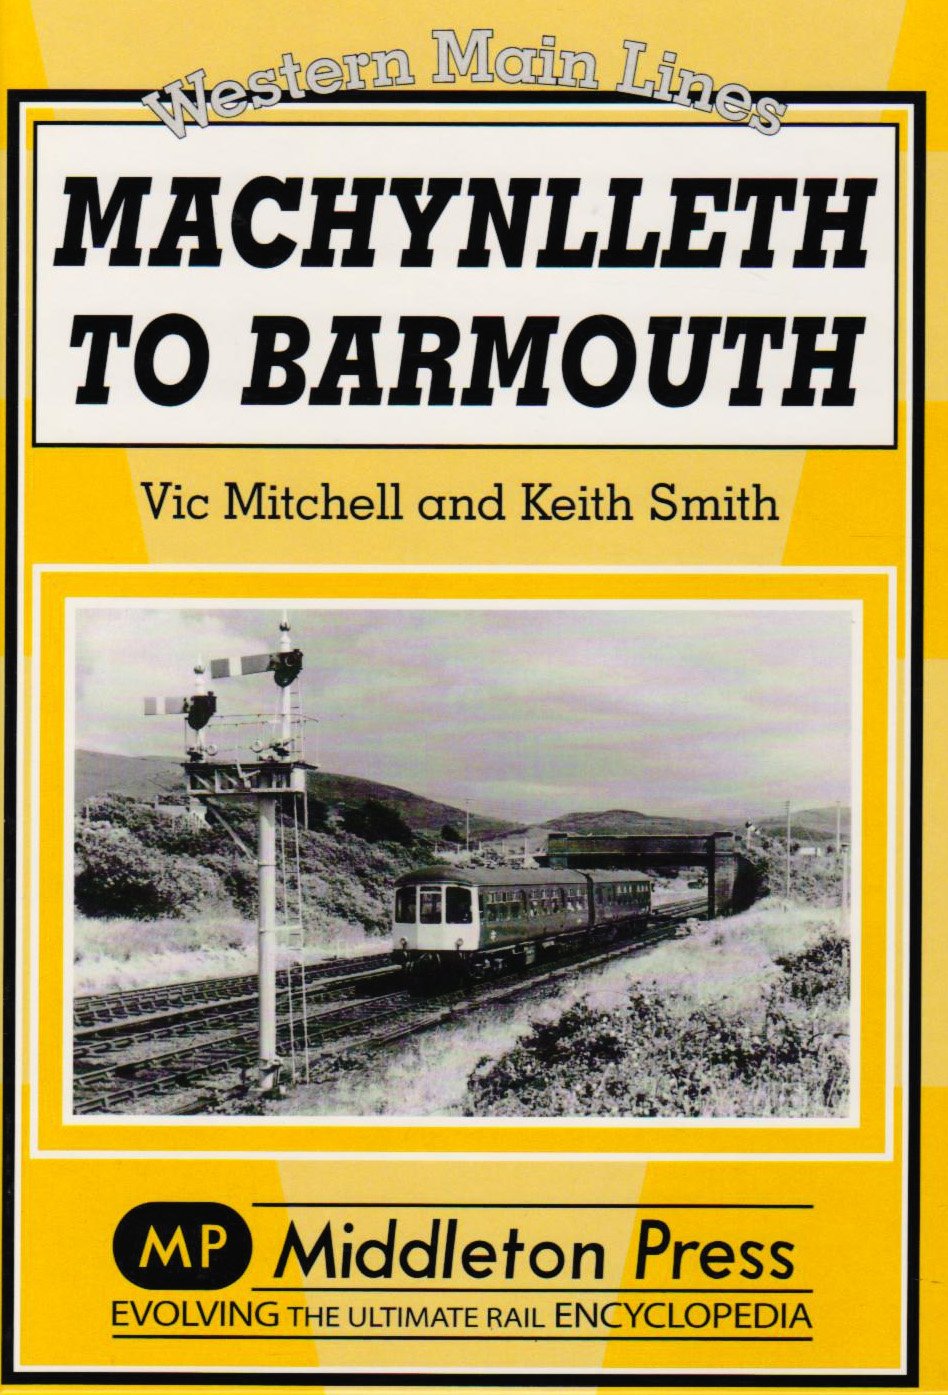 Western Main Lines Machynlleth to Barmouth BEING REPRINTED